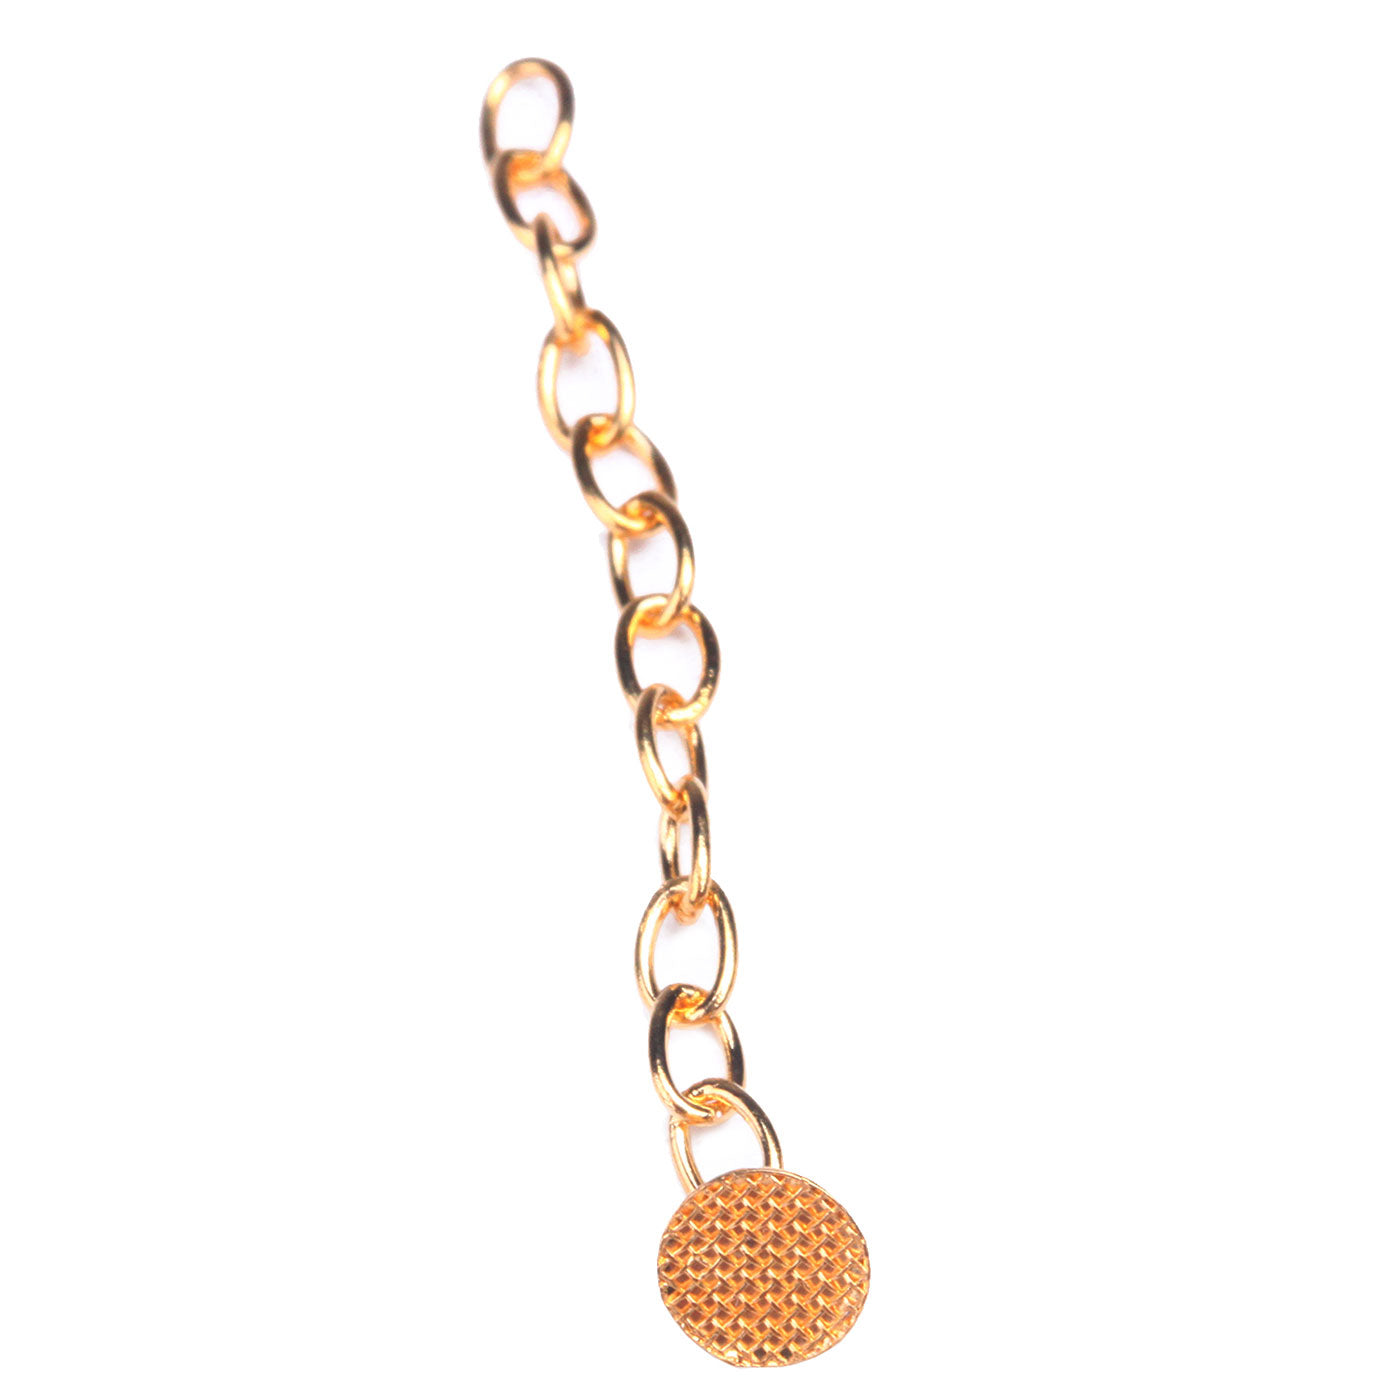 AZDENT Dental Traction Chain Gold Plated Round Buttons with Chain 10pcs/Bag - azdentall.com